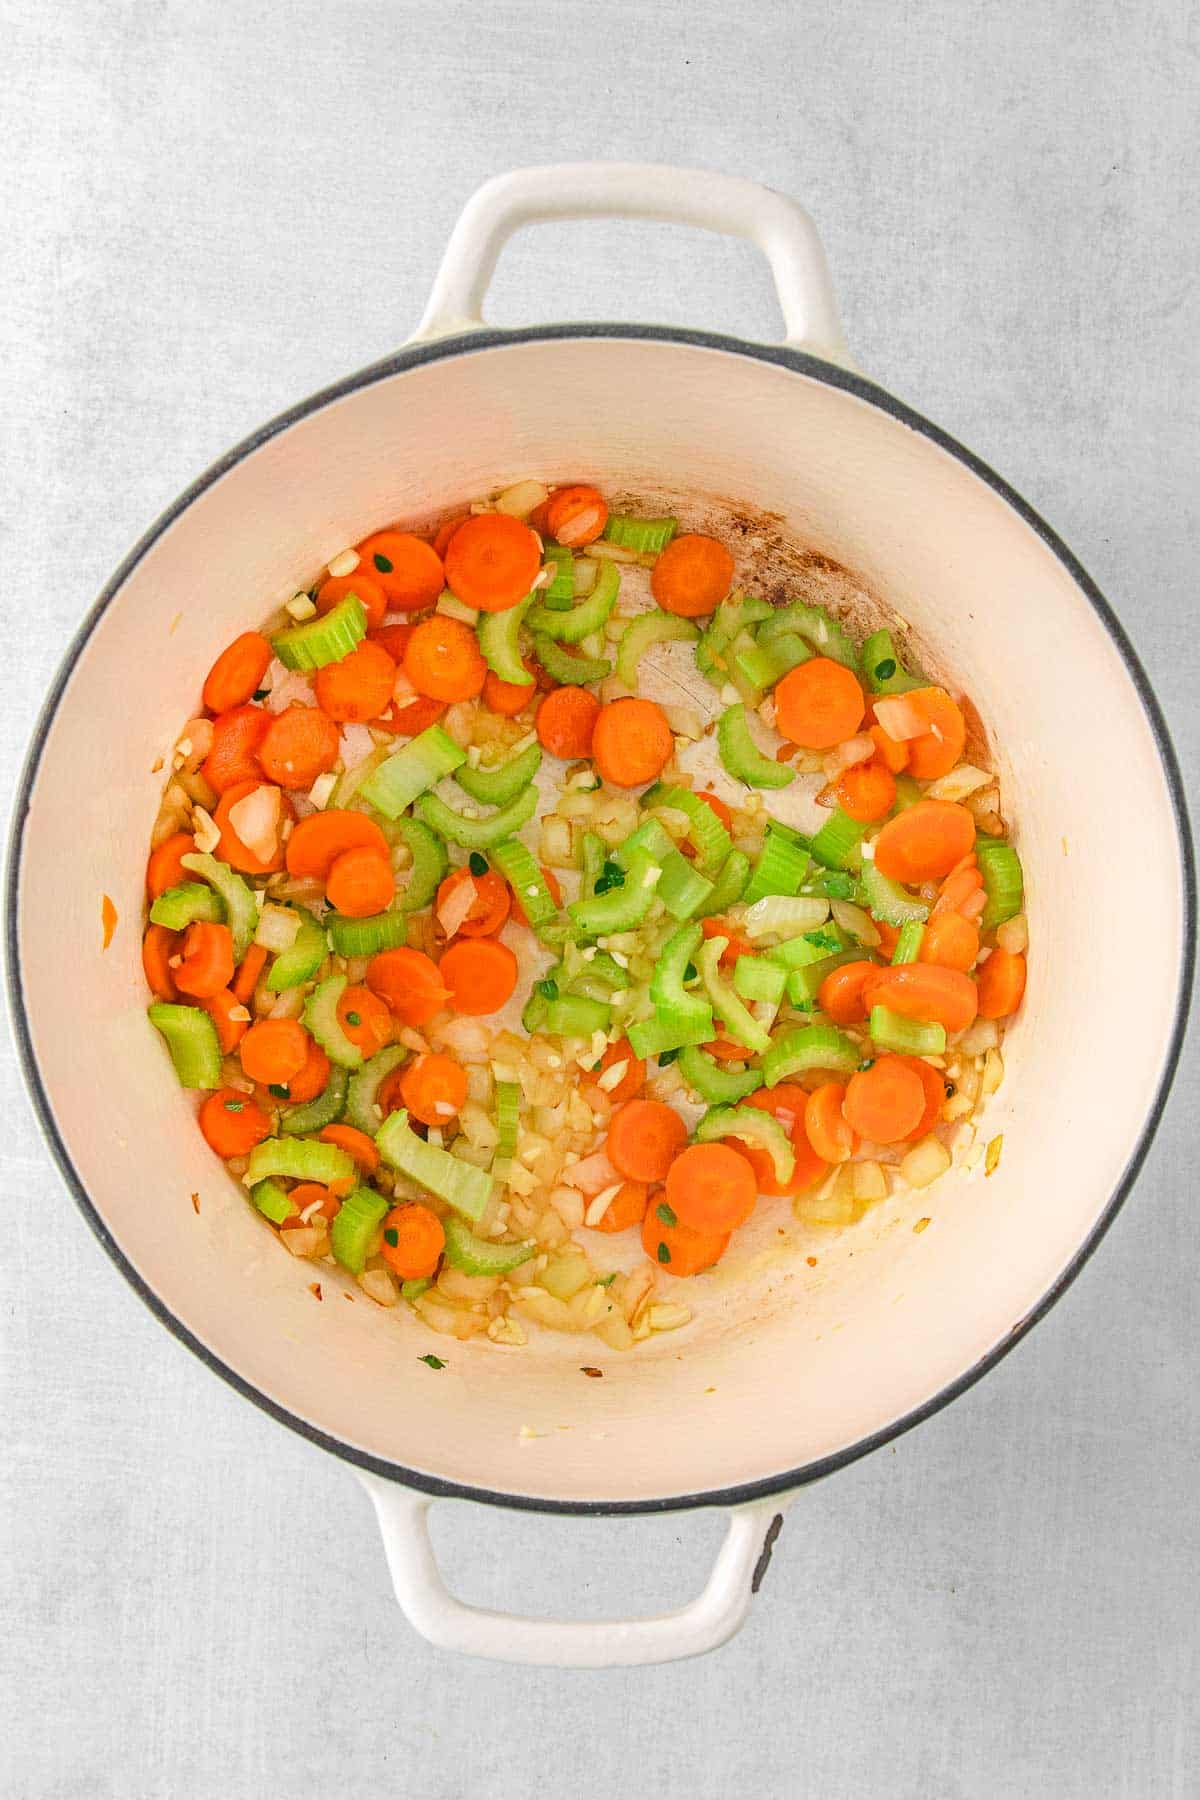 A white cooking pot filled with carrots, celery and onions.